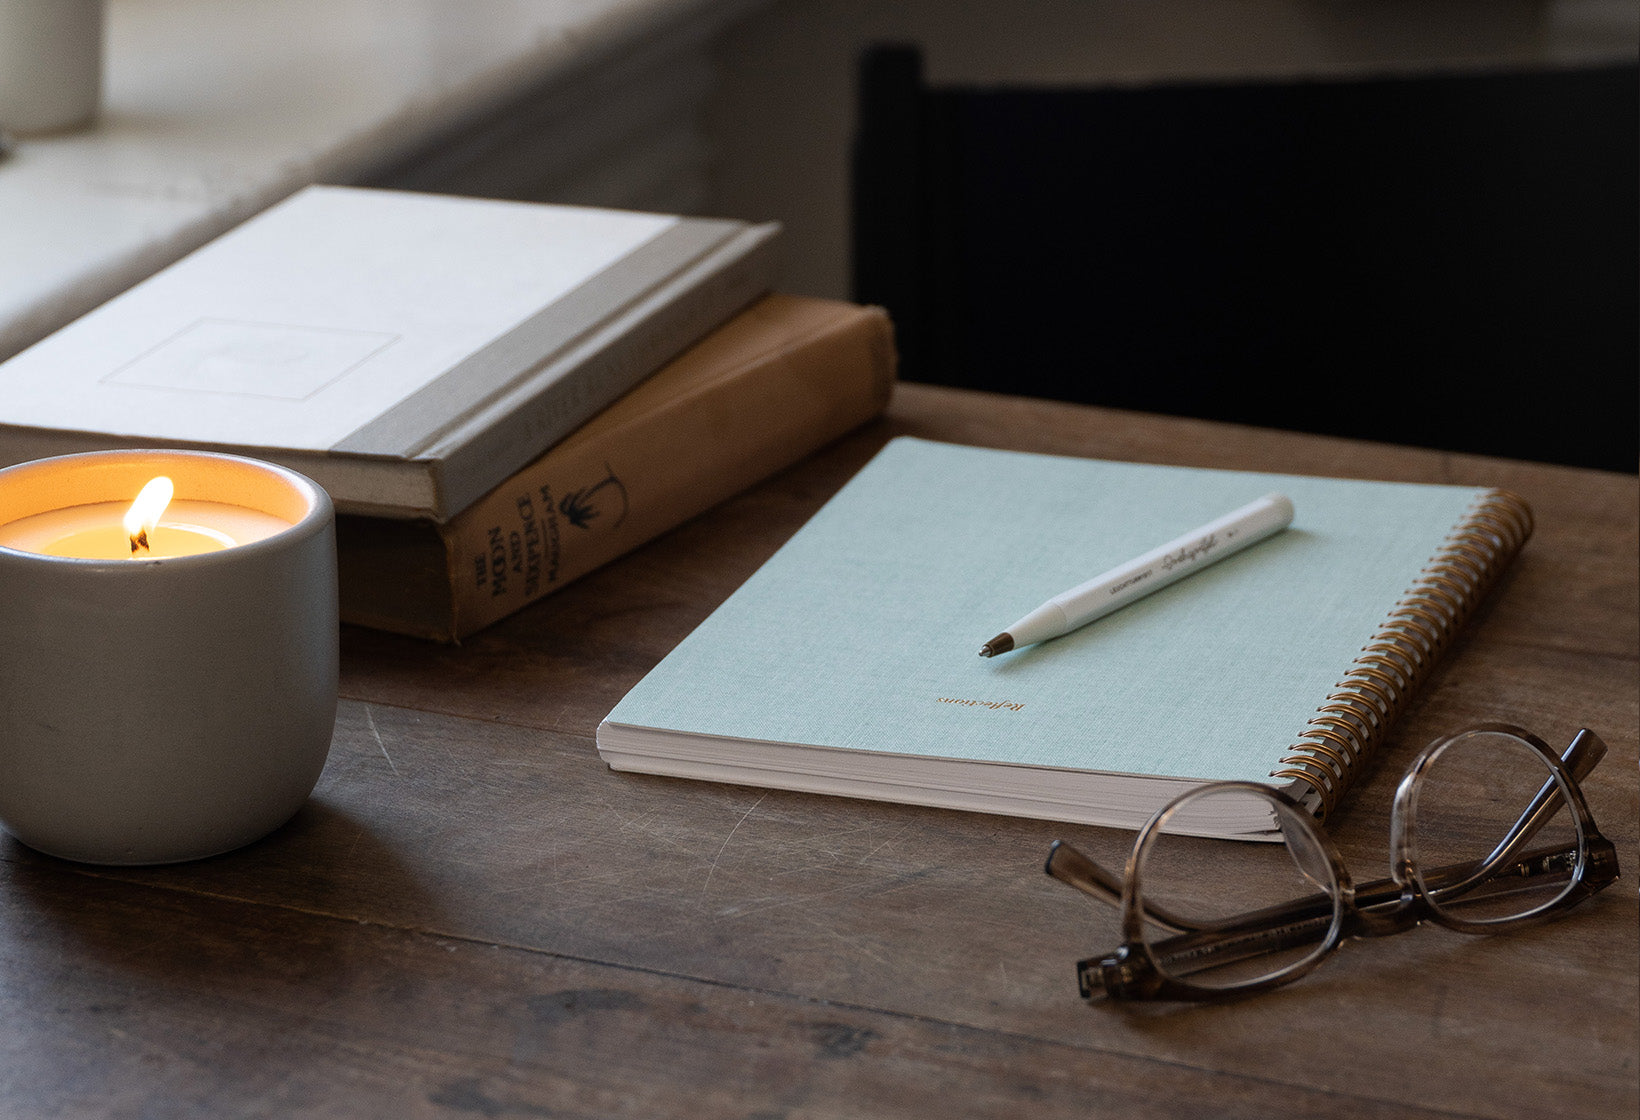 The Reflections Journal sits on a cozy wooden desk. A lit candle and other accessories including glasses and a pen sit aside. Light streams through a window.